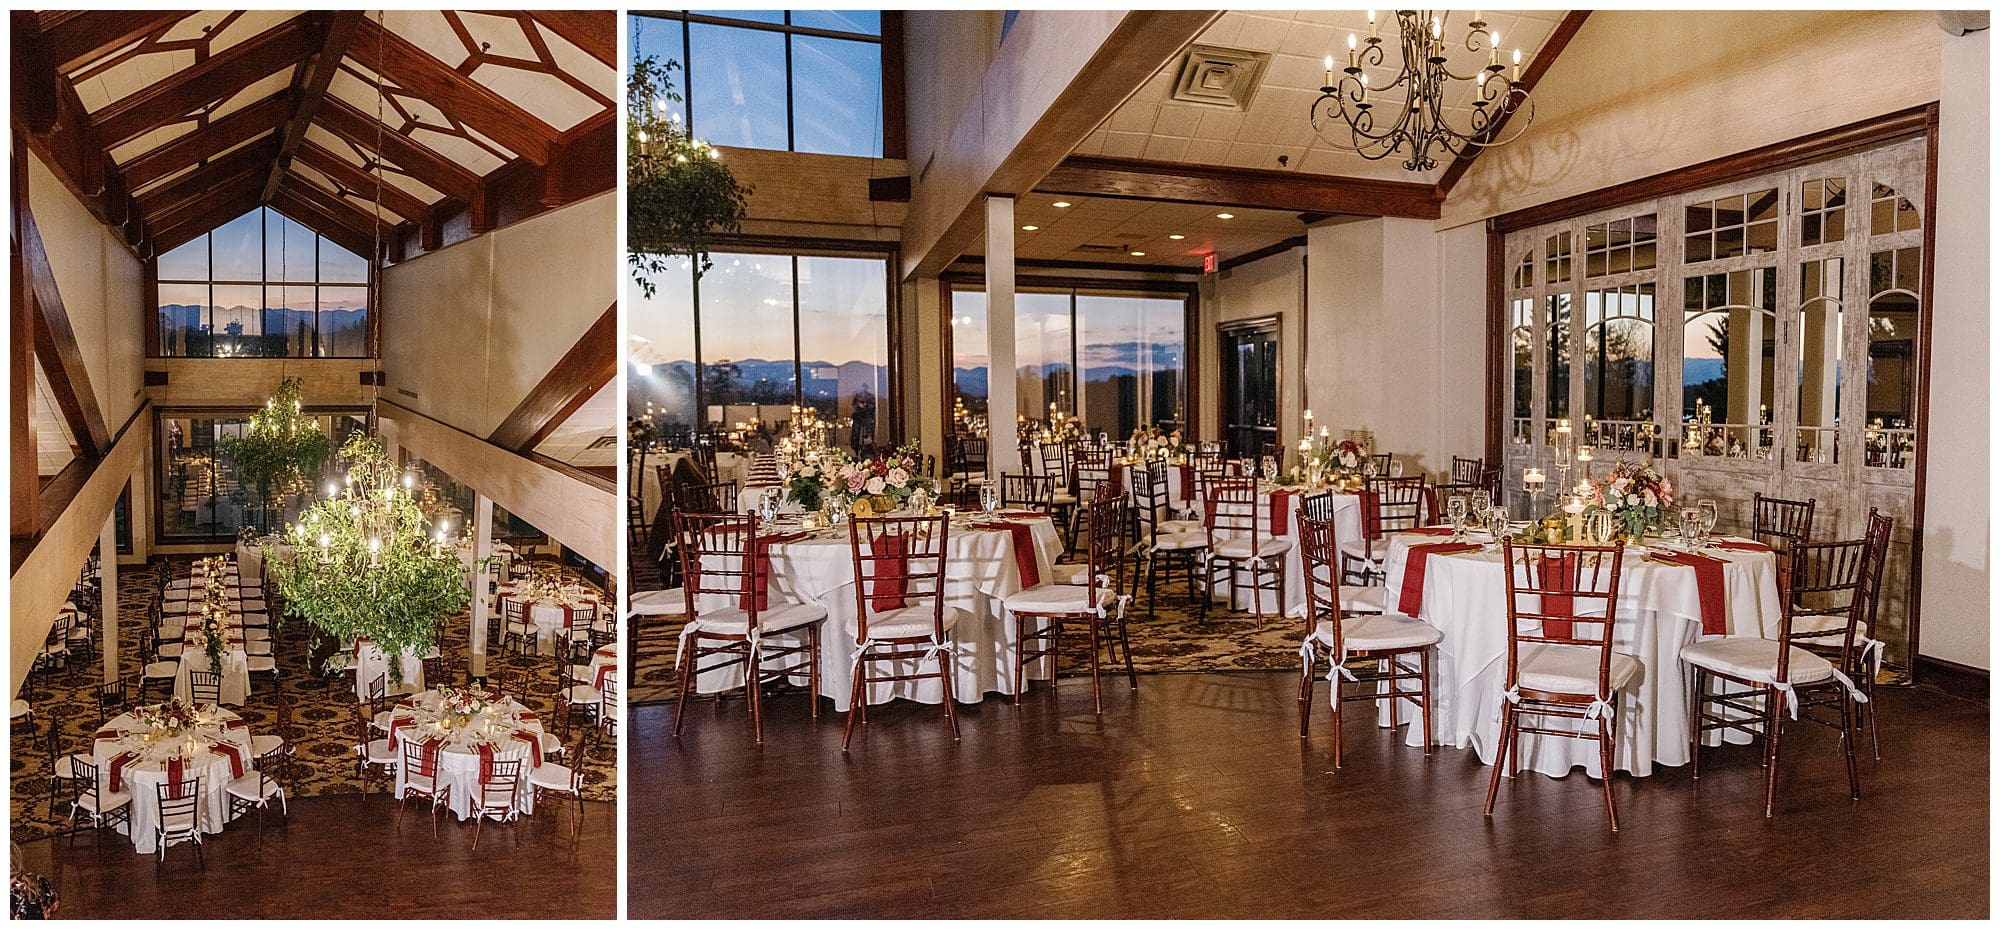 A wedding reception in a large room with tables and chairs.